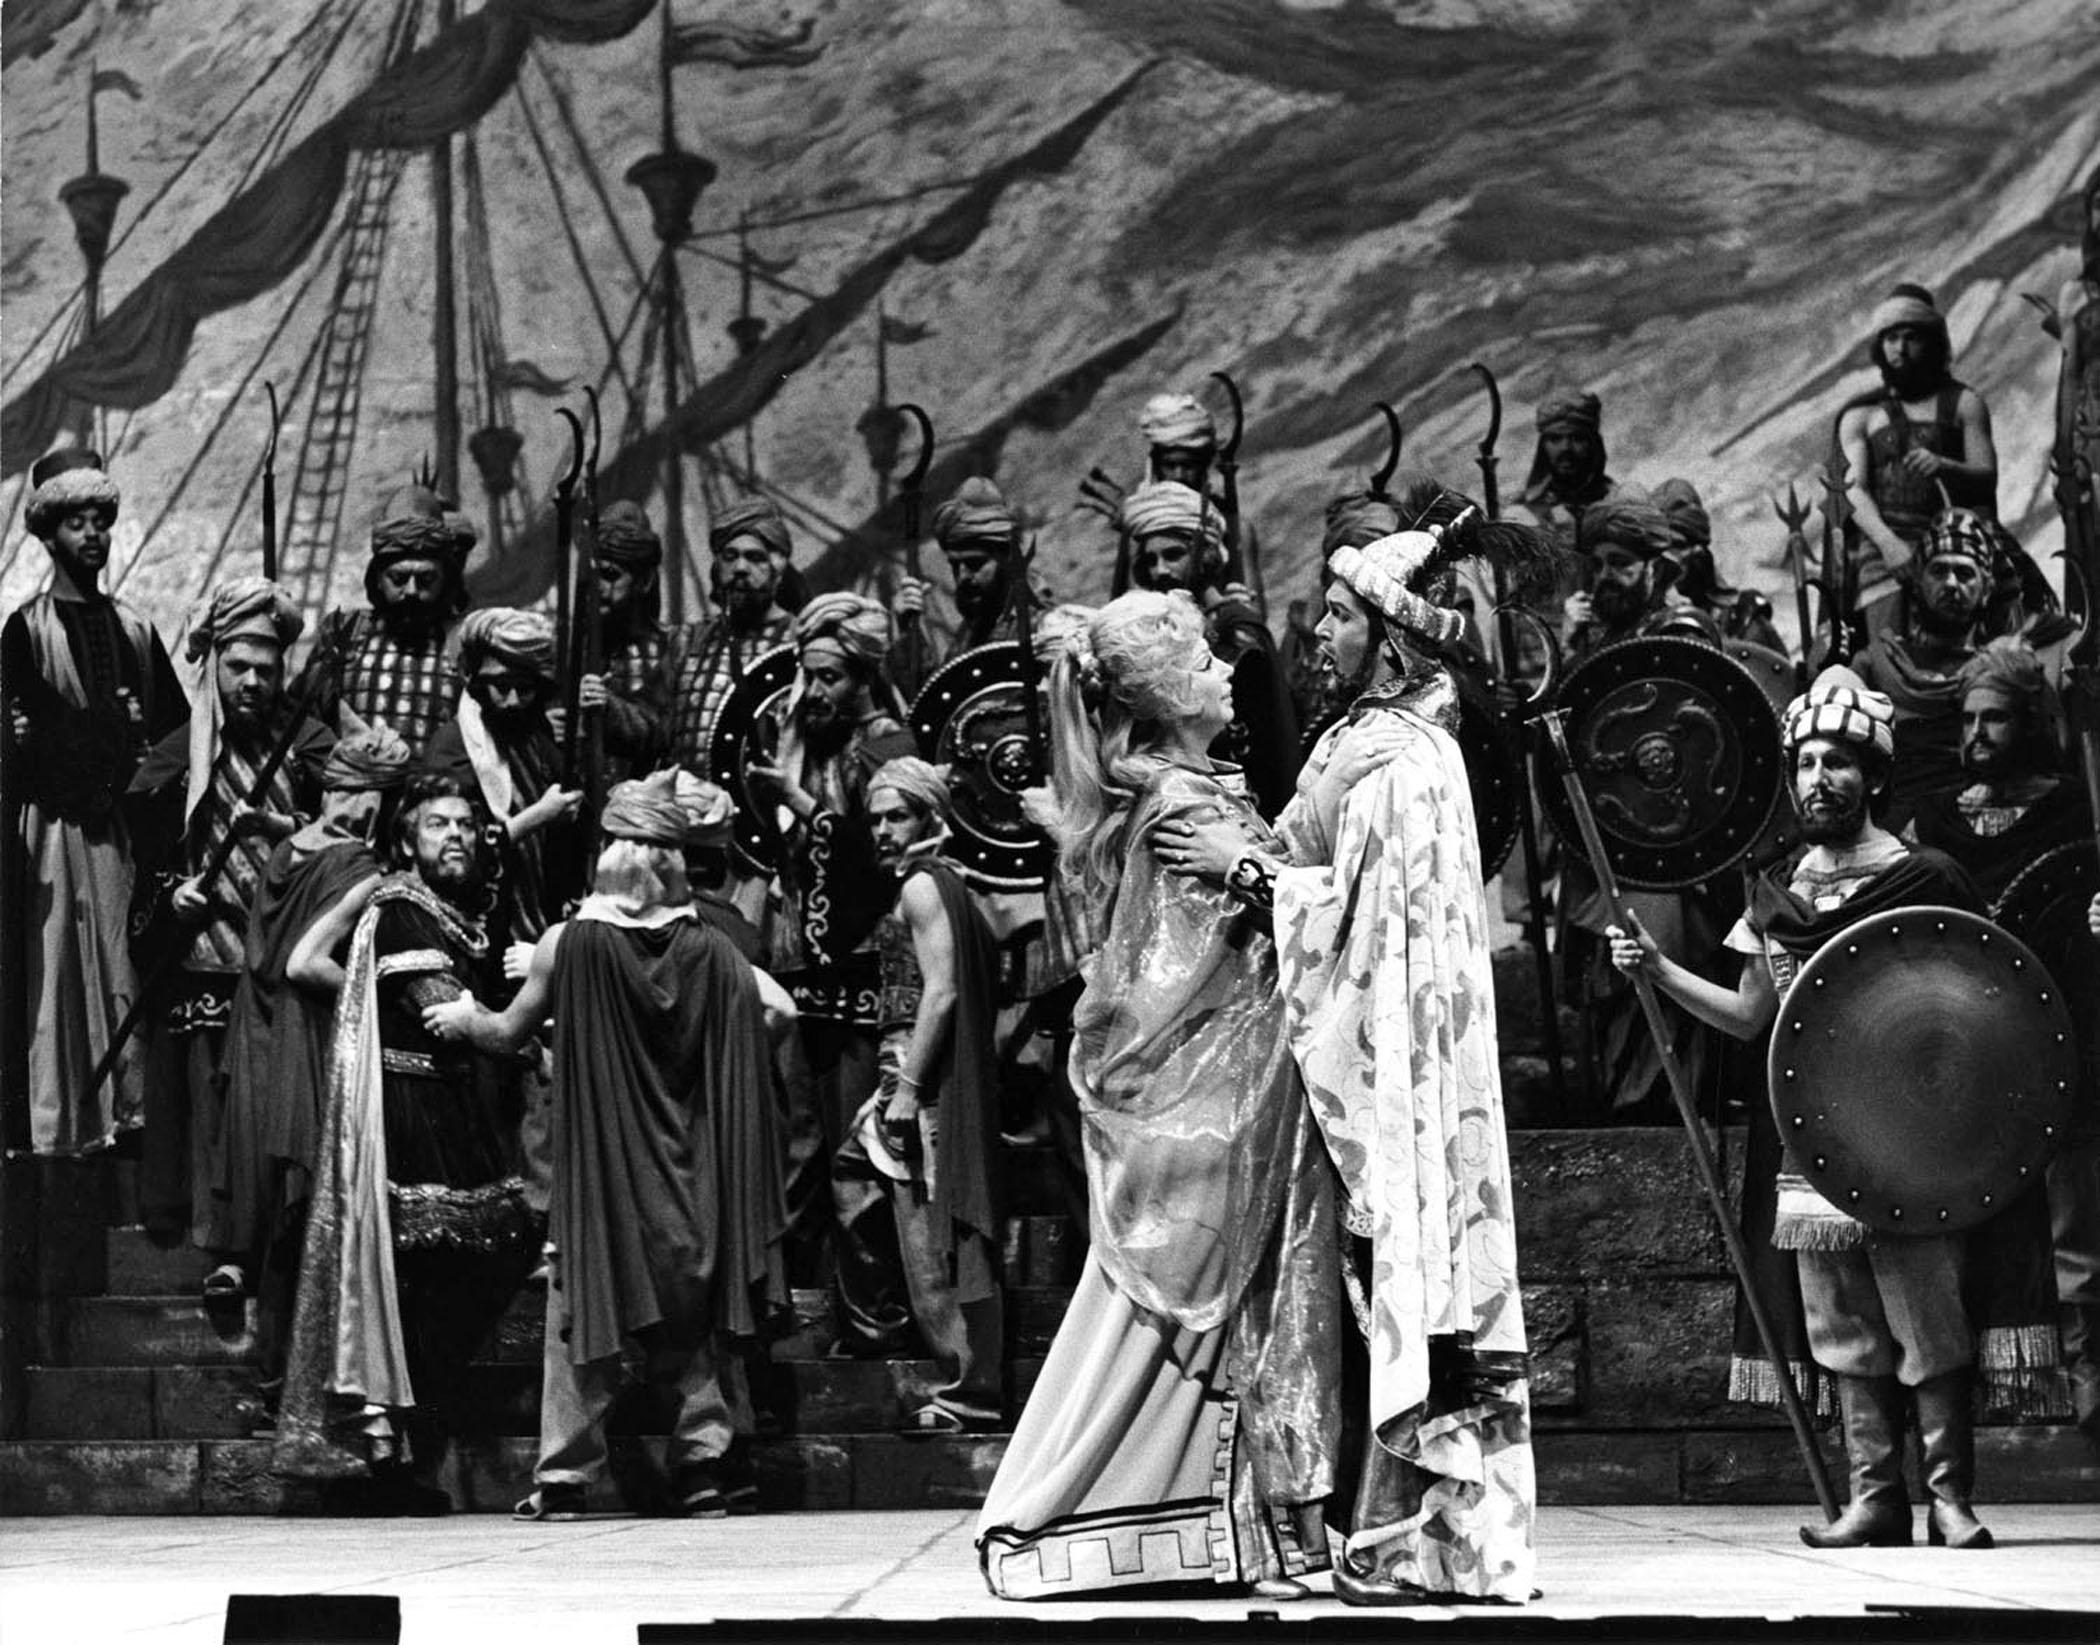 Jack Mitchell Black and White Photograph - Beverly Sills peforming at the Metropolitan Opera